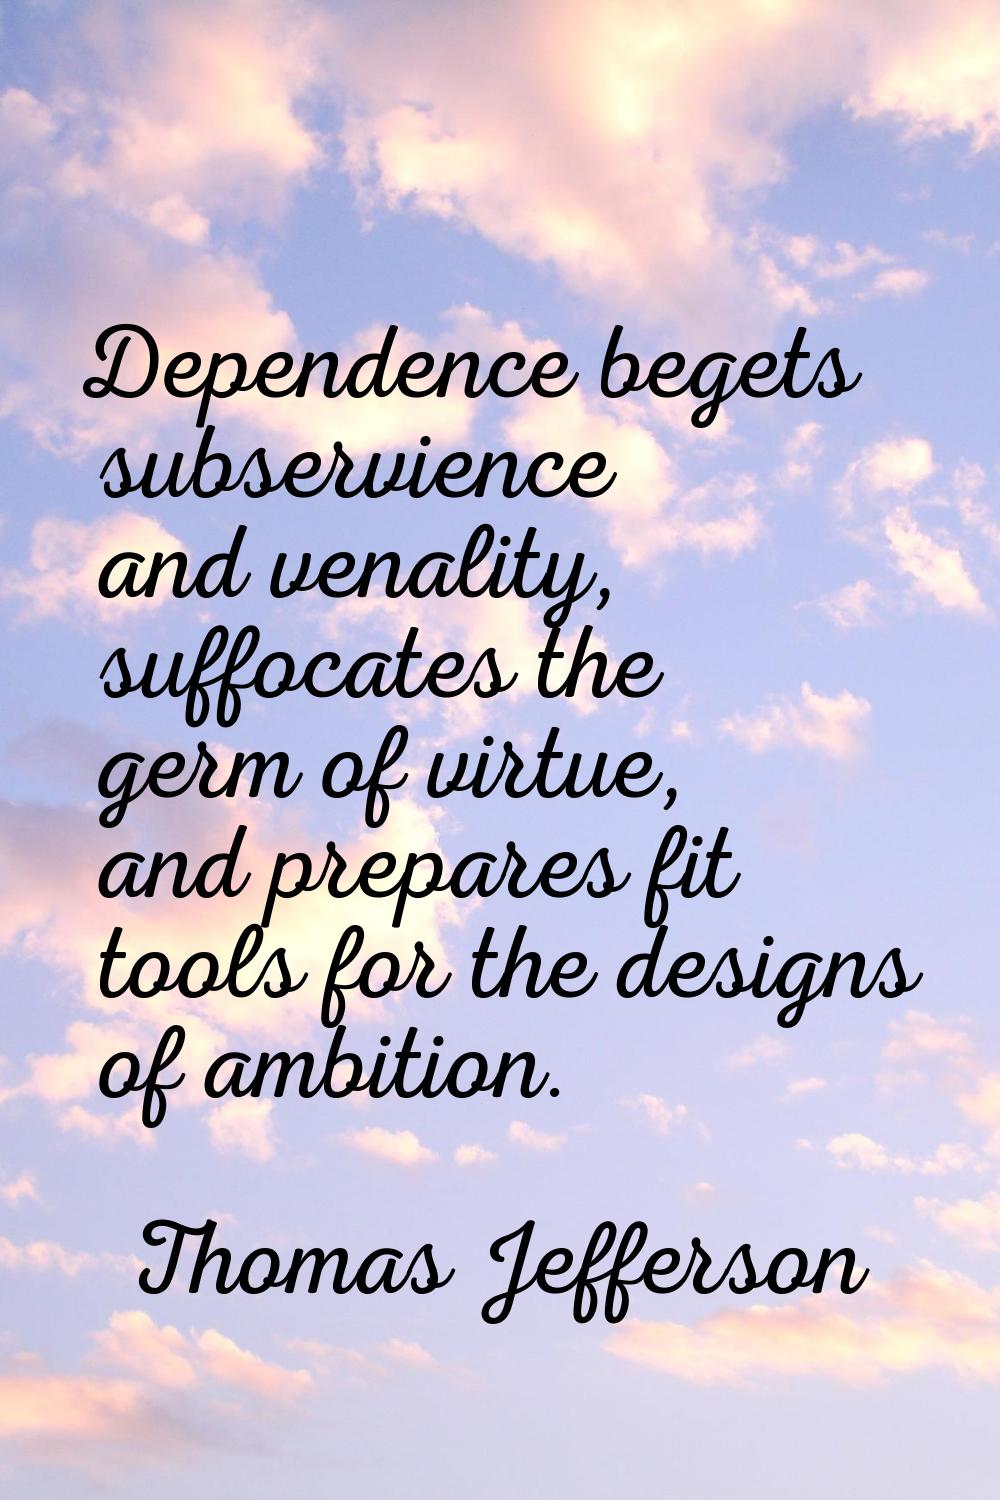 Dependence begets subservience and venality, suffocates the germ of virtue, and prepares fit tools 